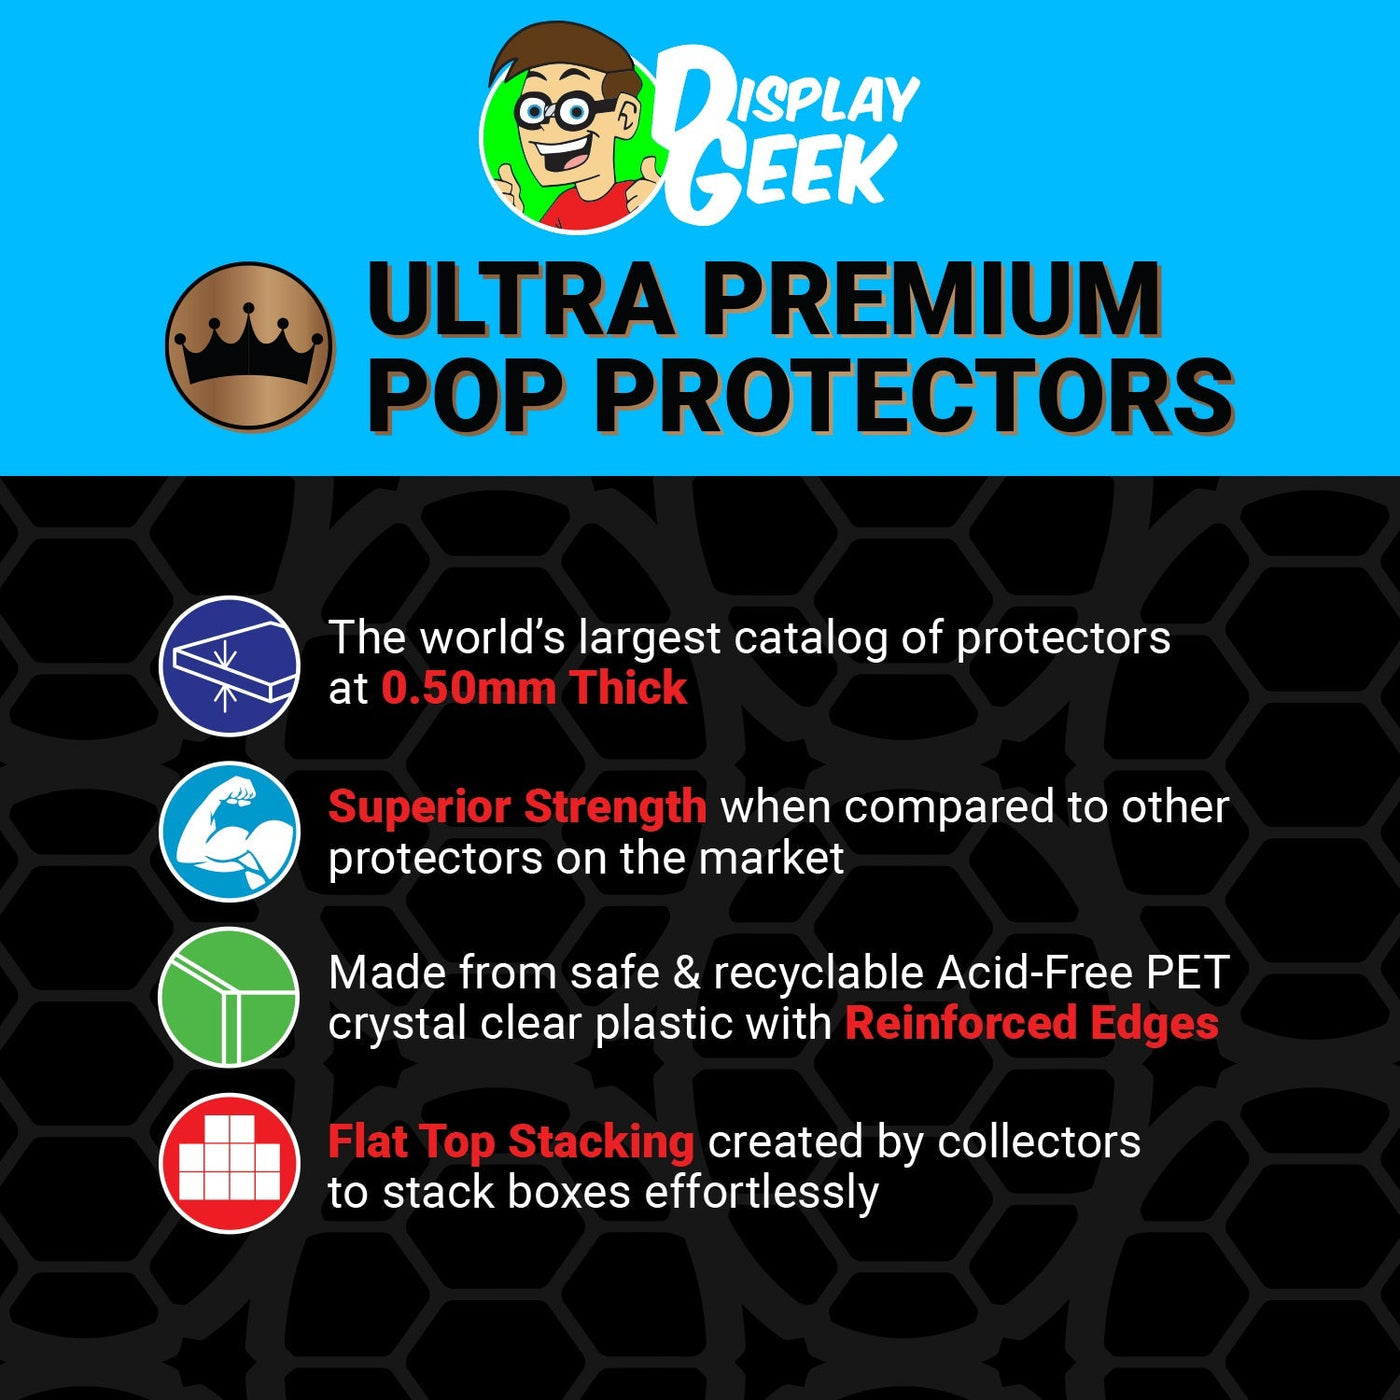 Pop Protector for Thor Ragnarok Gold Funko Pop Pez on The Protector Guide App by Display Geek